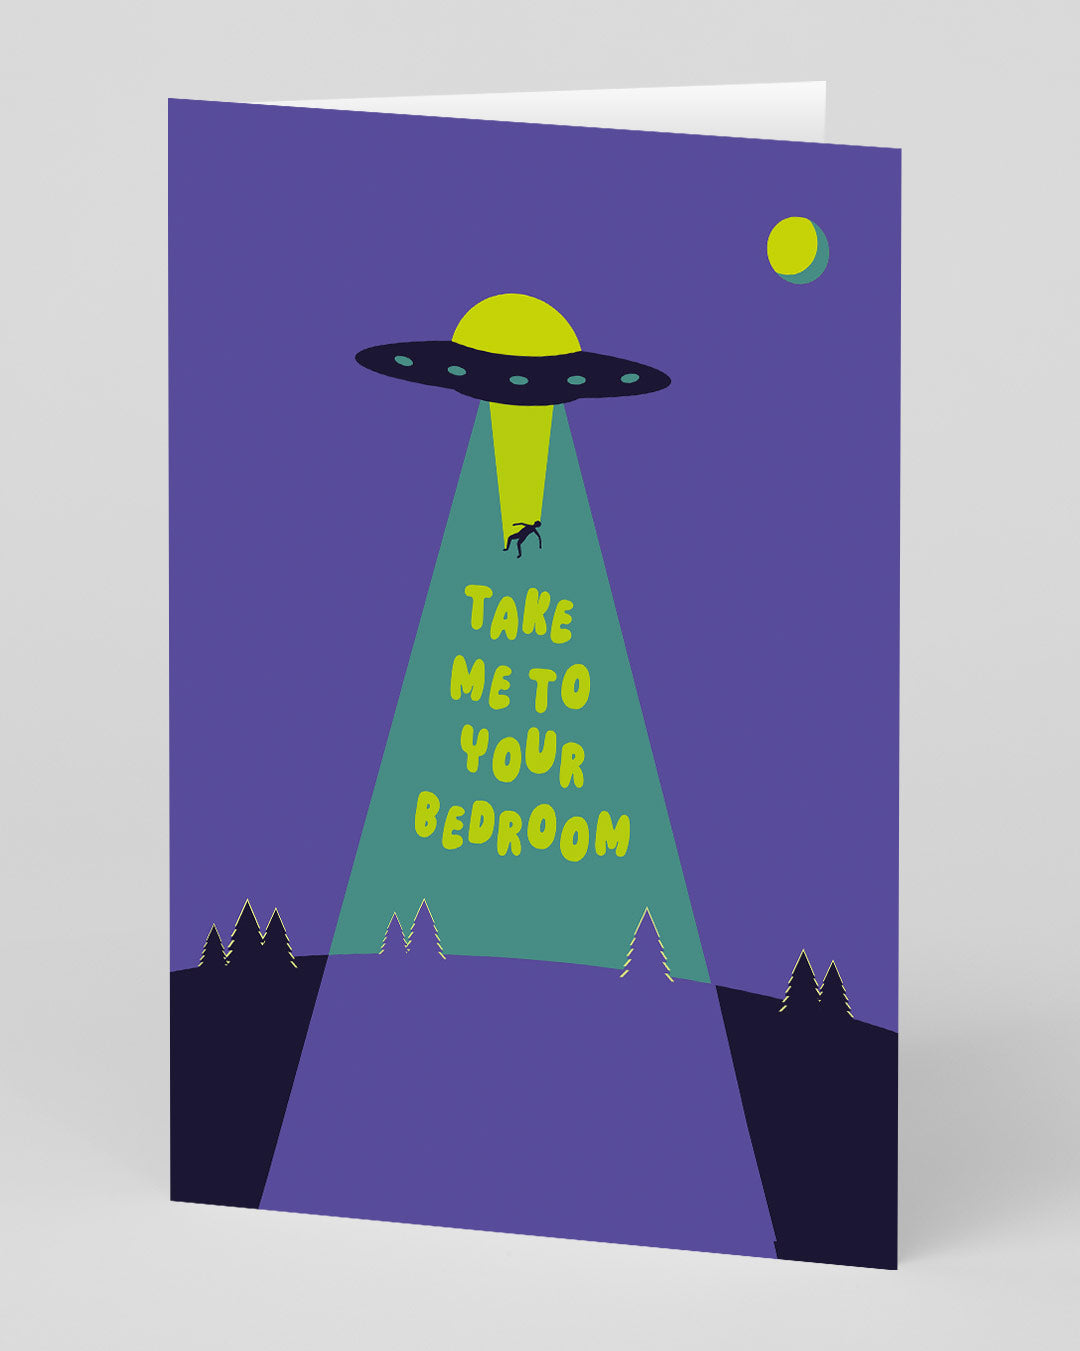 Valentine’s Day | Funny Valentines Card For Him or Her | Personalised UFO Take Me To Your Bedroom Greeting Card | Ohh Deer Unique Valentine’s Card | Made In The UK, Eco-Friendly Materials, Plastic Free Packaging